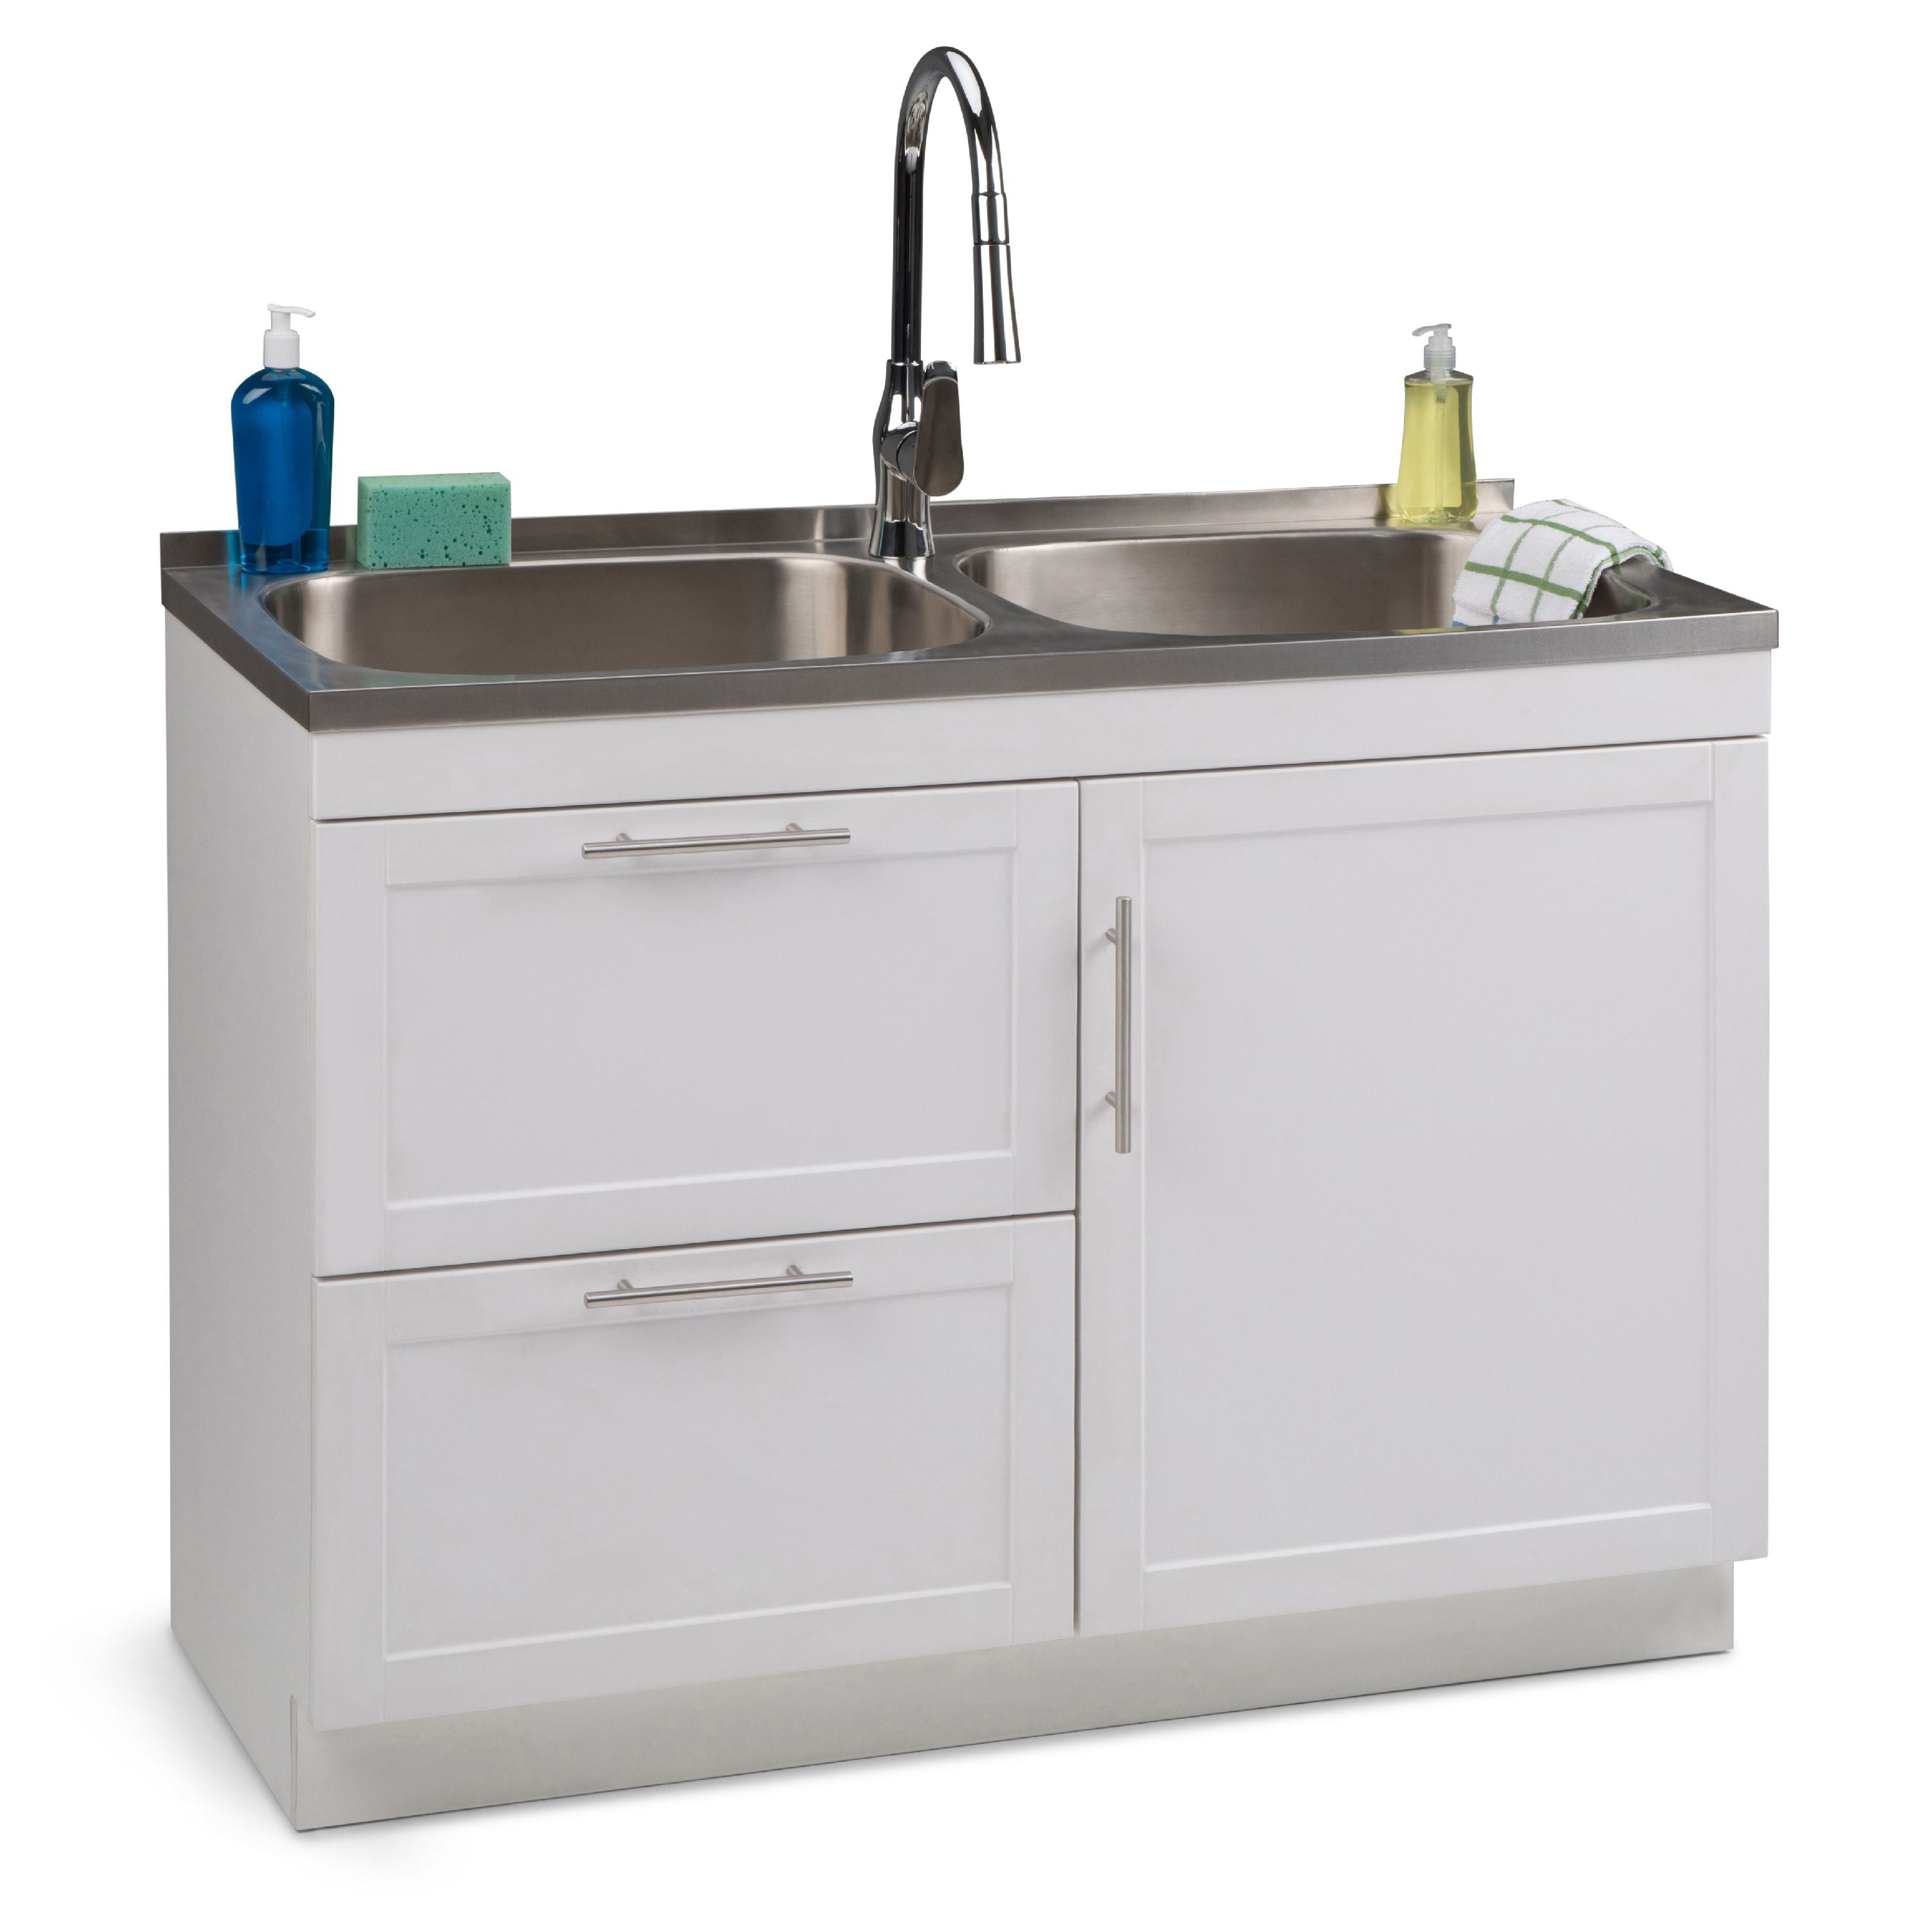 Simpli Home Seiger 46 inch Laundry Cabinet with Pull-out Faucet and ...